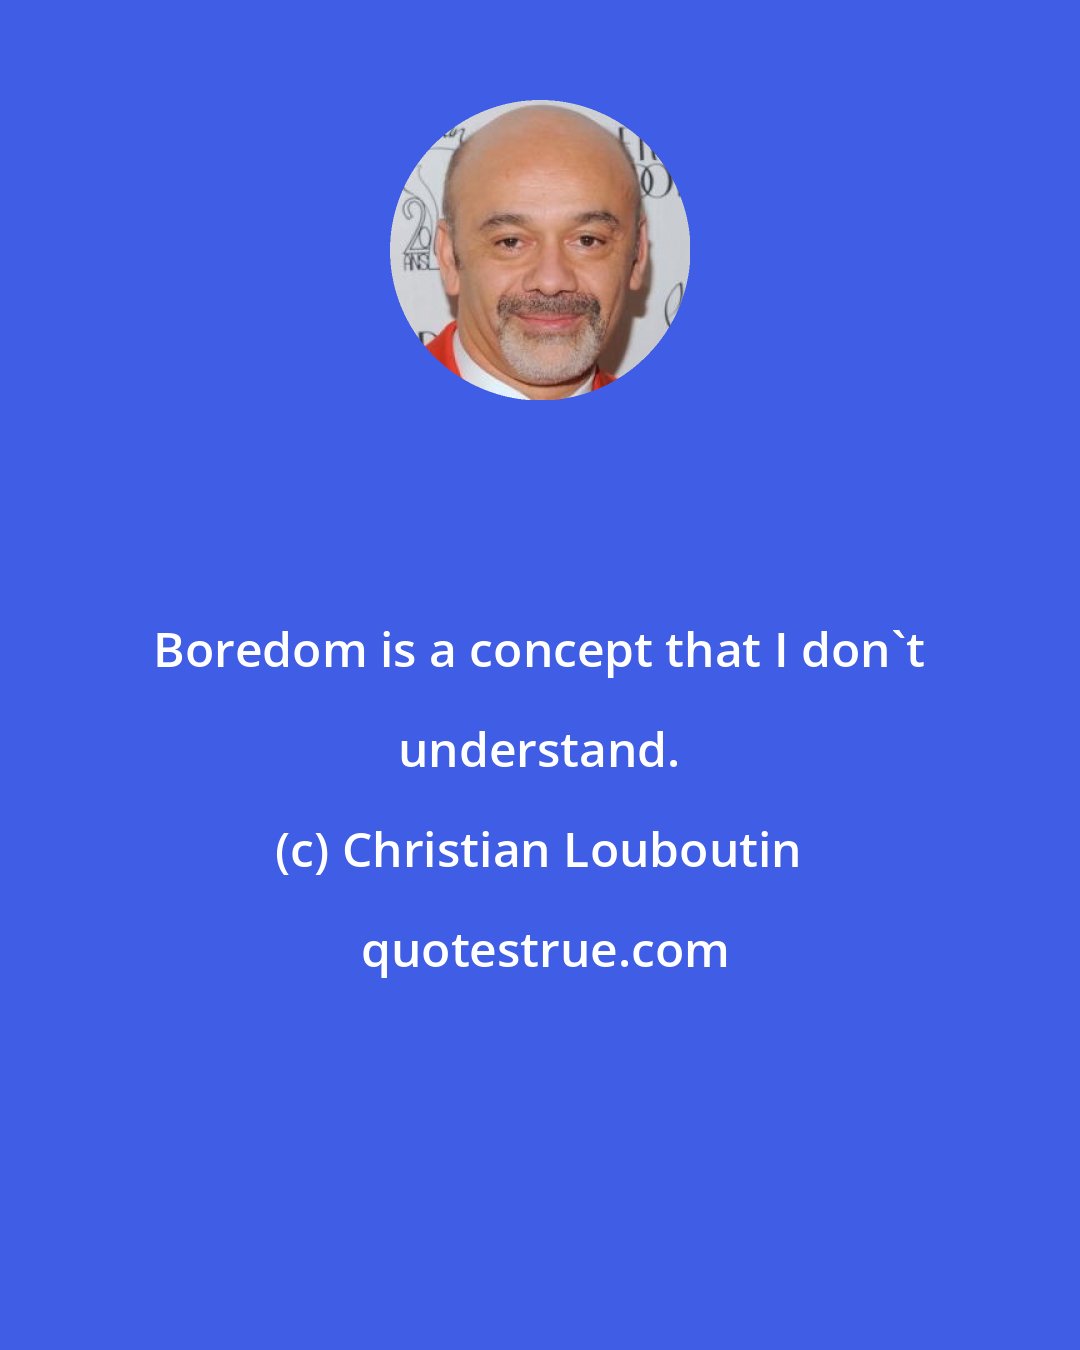 Christian Louboutin: Boredom is a concept that I don't understand.